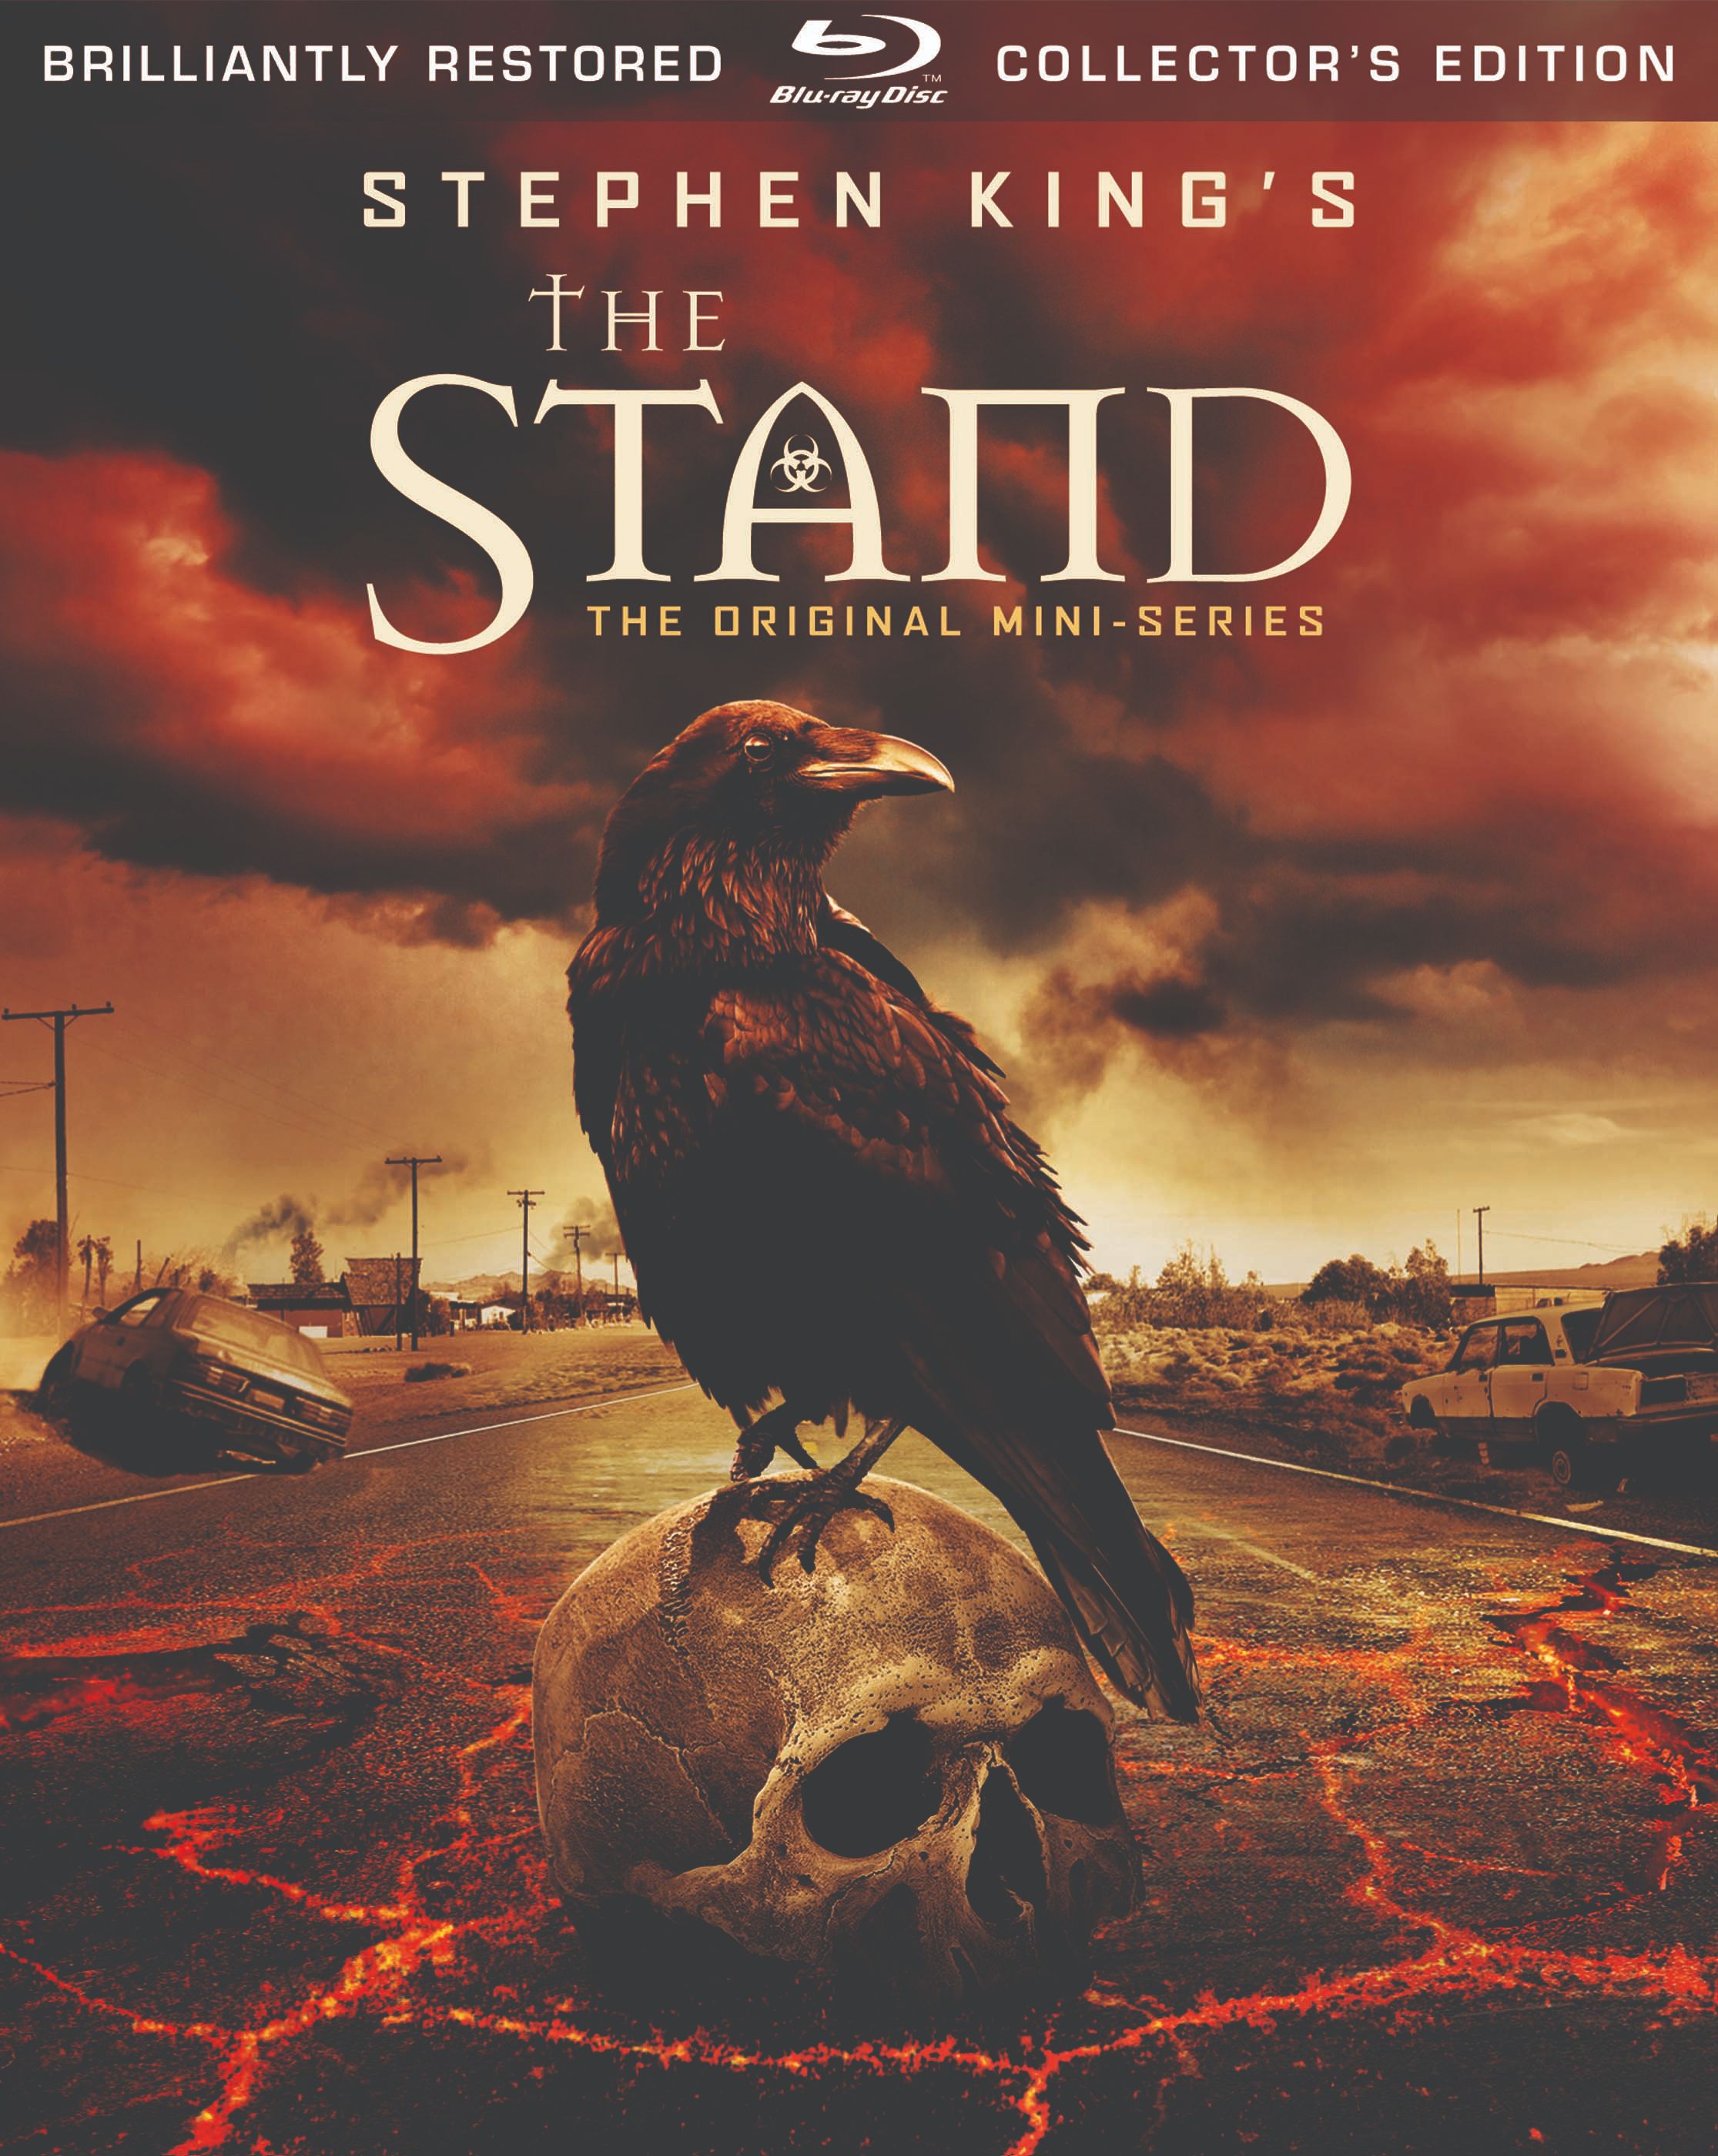 The Stand blu-ray cover art